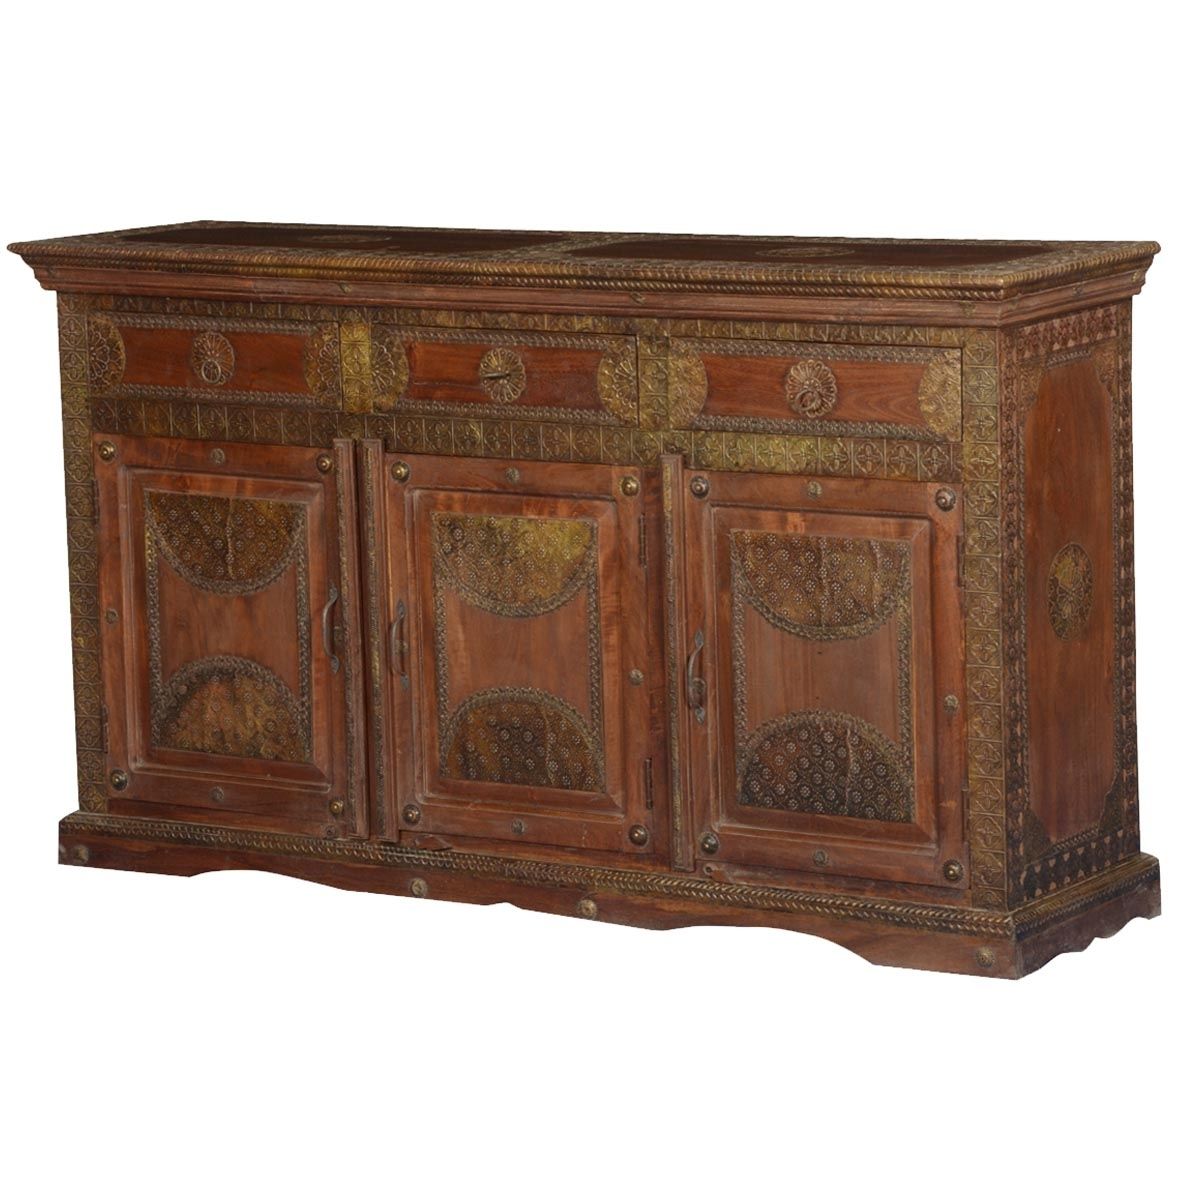 Elizabethan Mango Wood Brass Buffet 3 Drawer Sideboard For Most Current Open Shelf Brass 4 Drawer Sideboards (View 10 of 20)